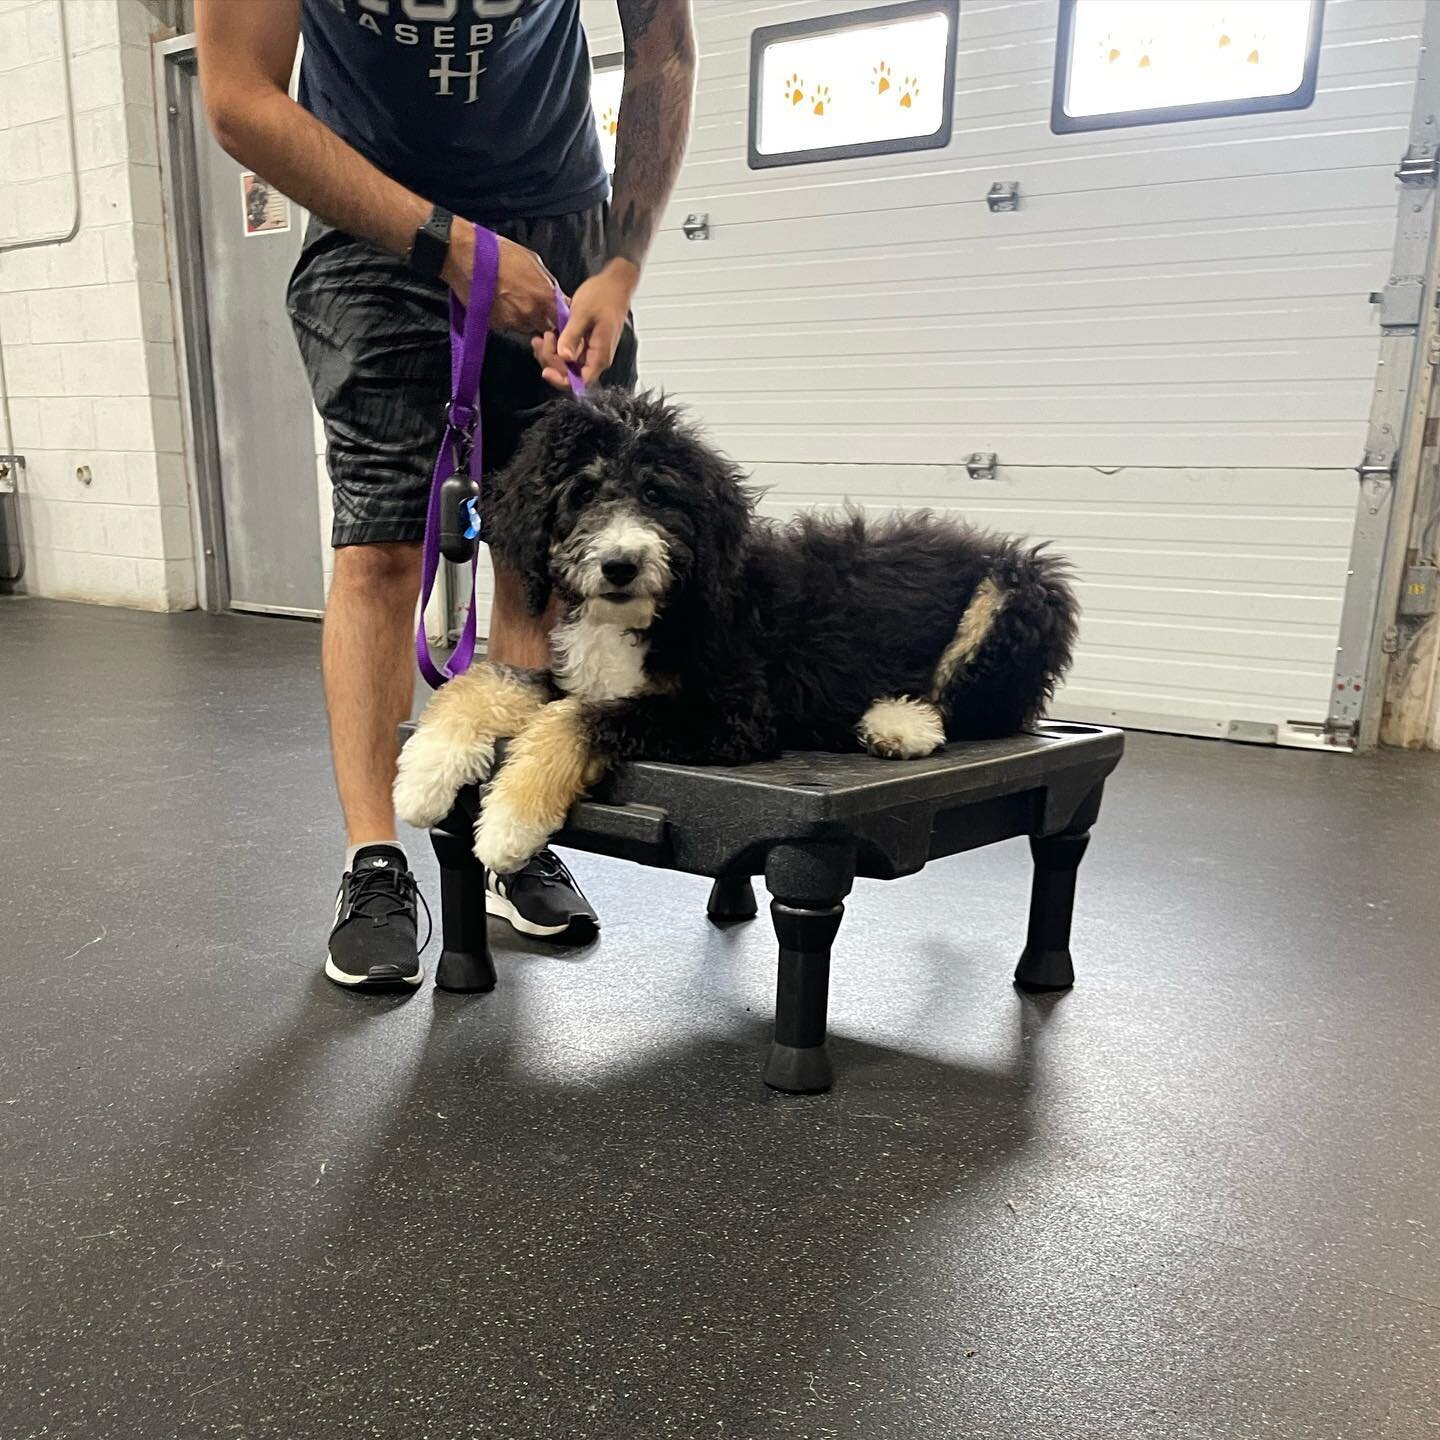 Meet Stella! 🐾

Stella is a five-month old Bernedoodle puppy who joined our AO Fur-Family in June of this year for a customized basic obedience training plan that was designed to meet the Lopez Family's needs as well as accomplish their overall trai